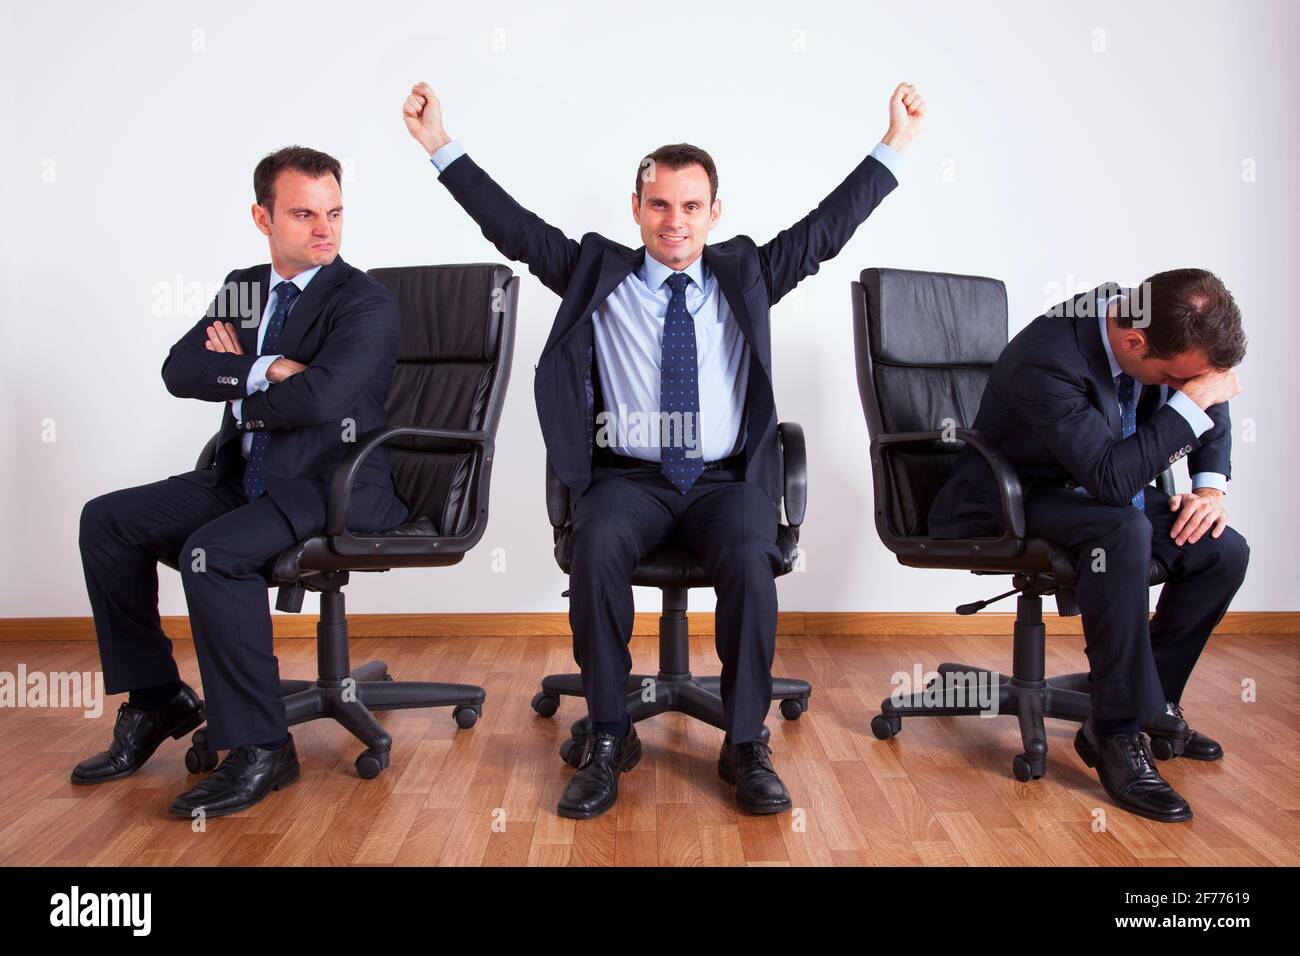 One successful businessman between two jealous businessman Stock Photo